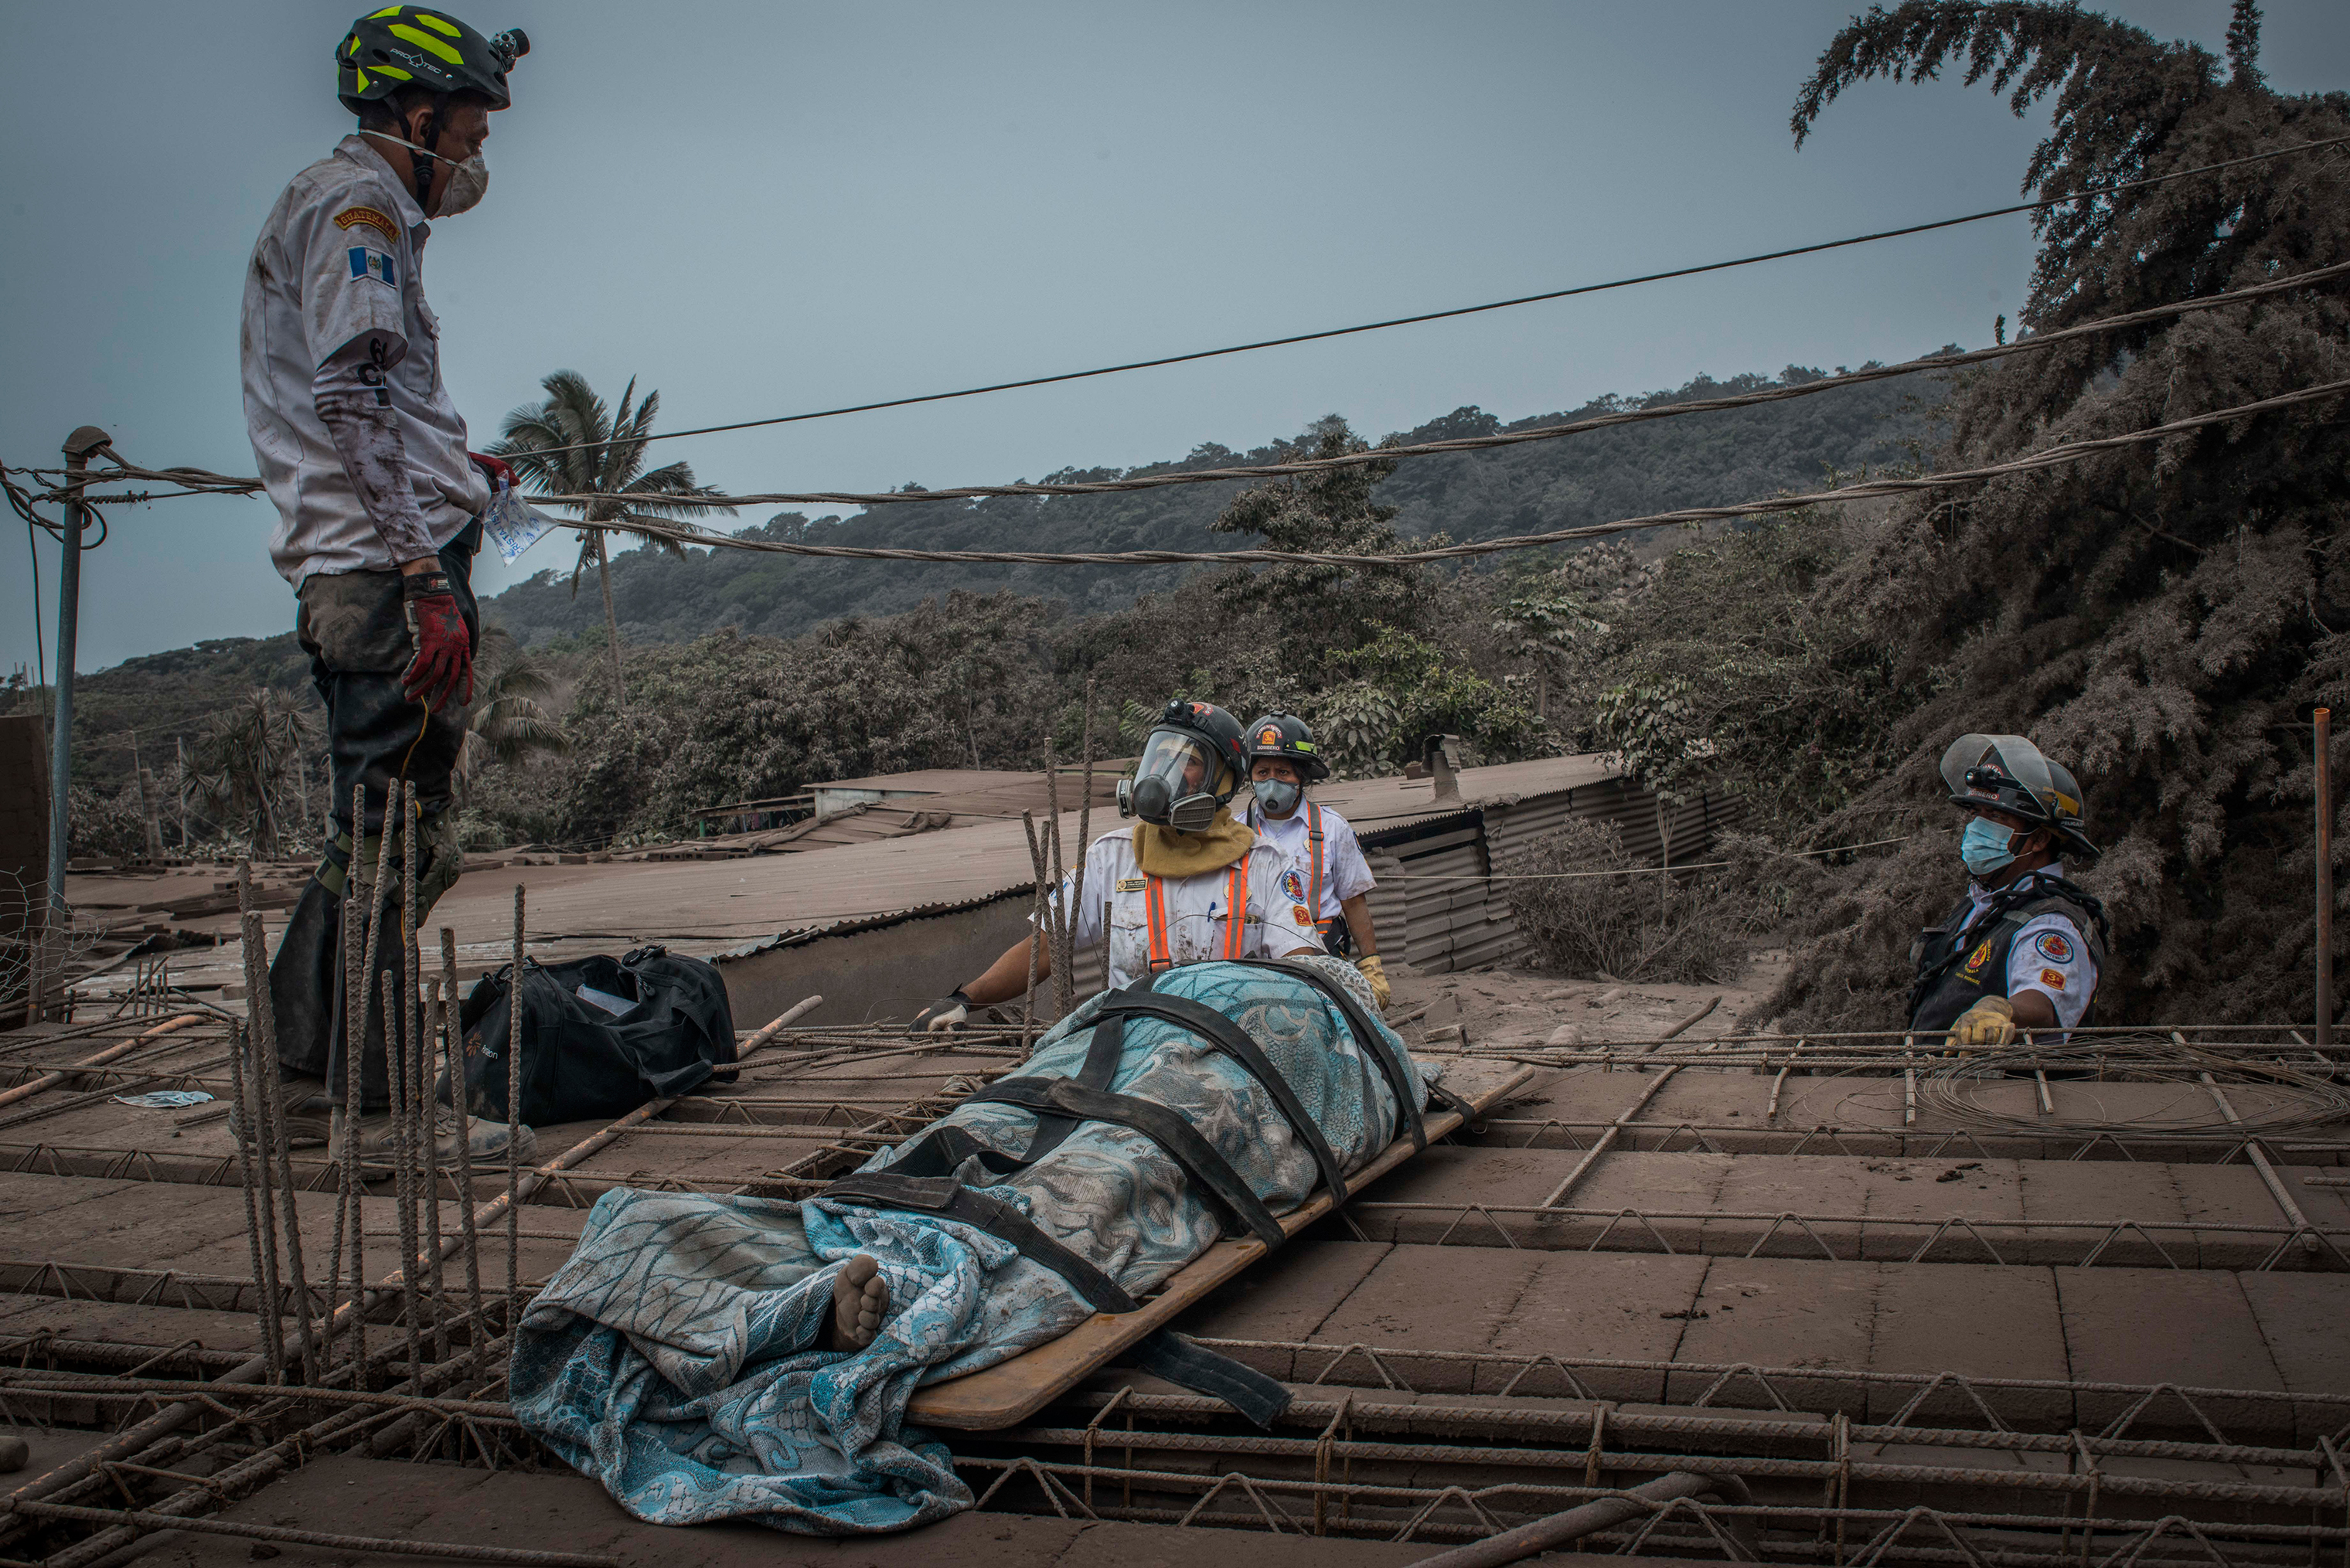 Rescuers recover a body among the ruins of the village of San Miguel Los Lotes, near the Guatemalan city of Escuintla, on June 4. (Daniele Volpe)